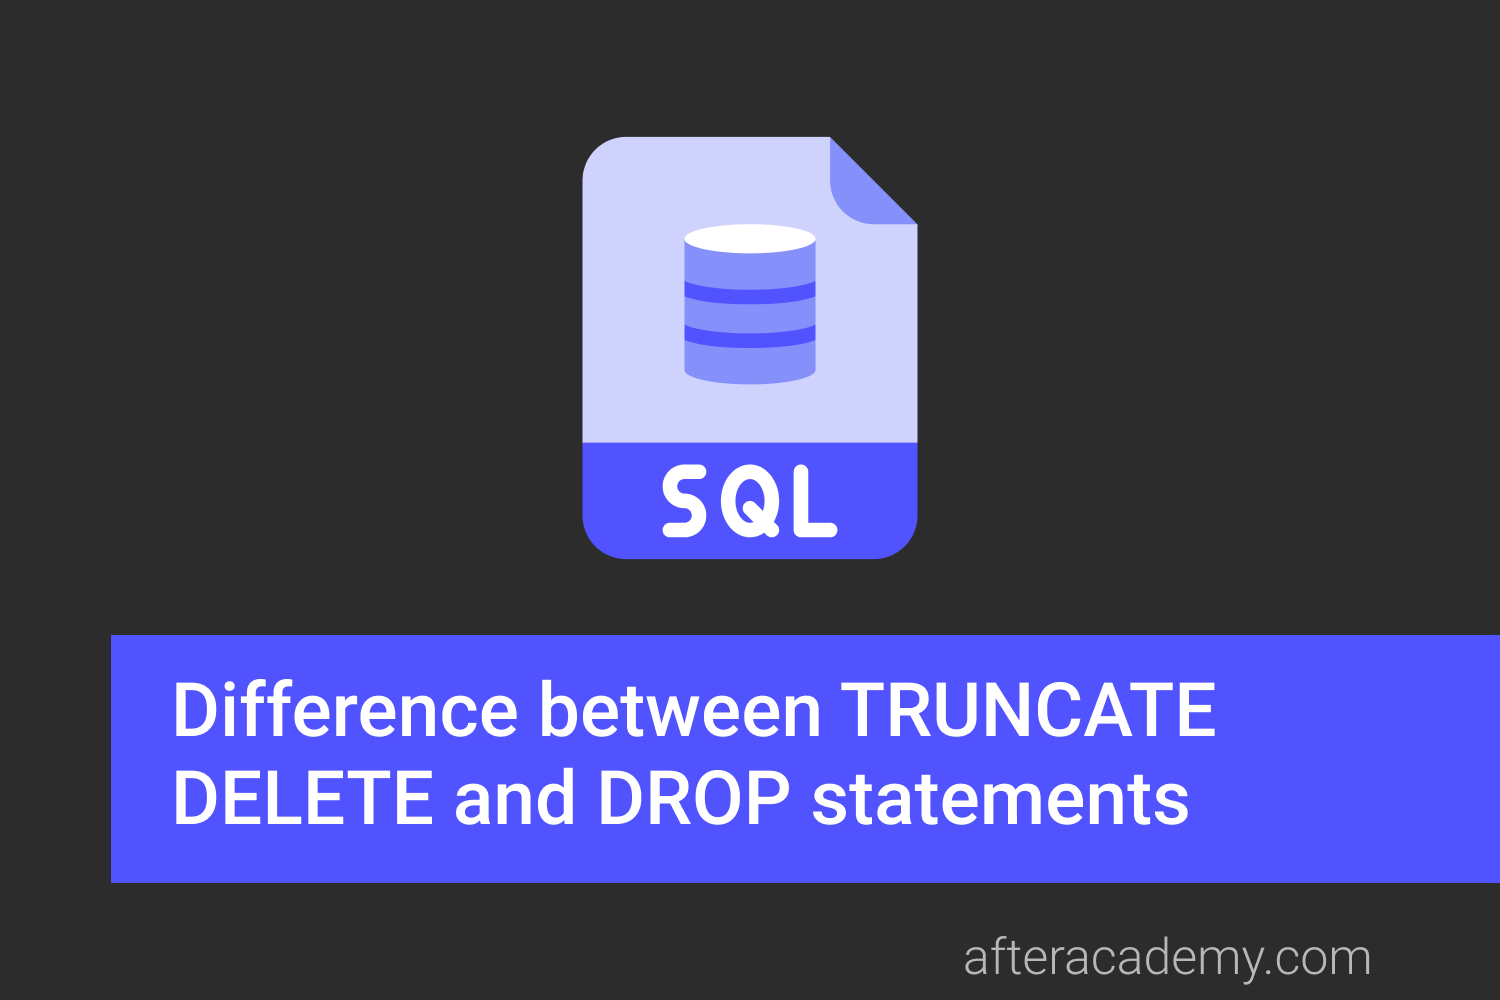 What is the difference between TRUNCATE, DELETE and DROP statements?